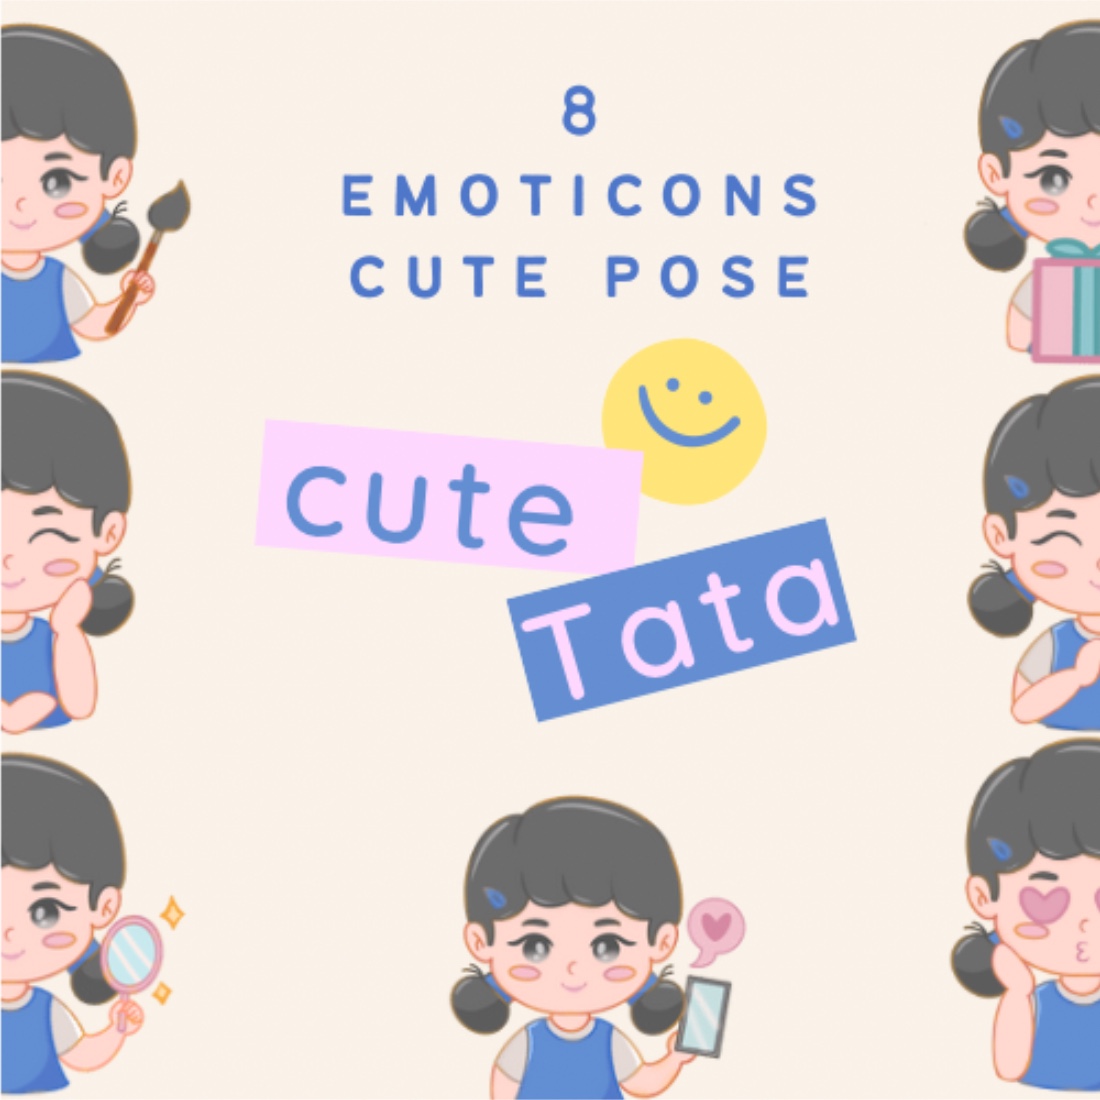 8 Cute Girl Facial Expressions - Only $10 cover image.